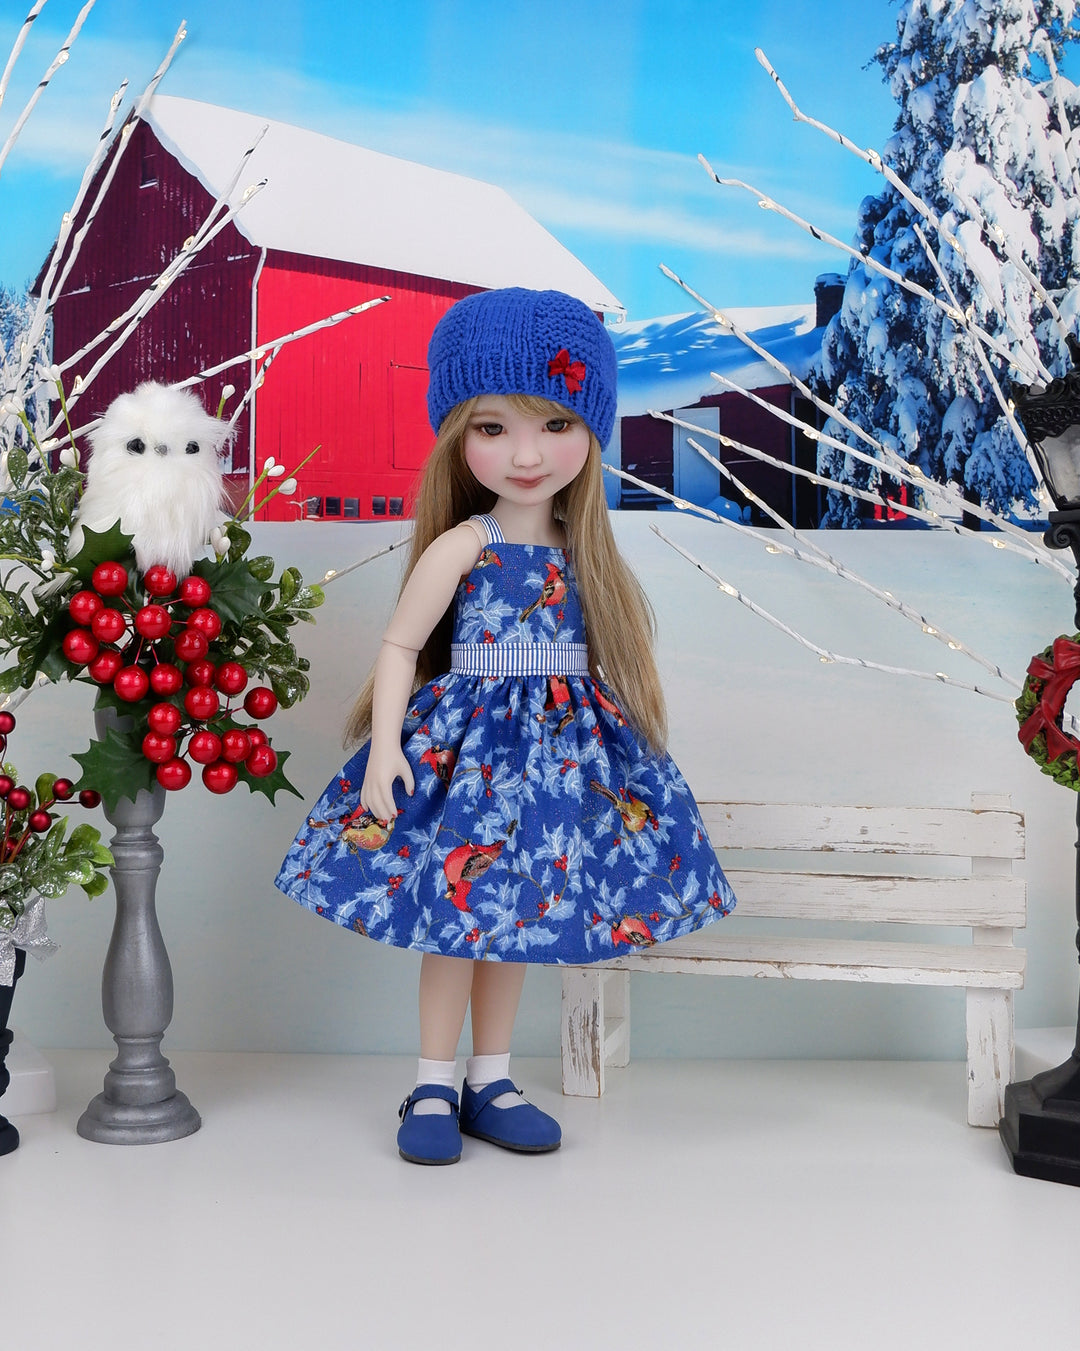 Winter Cardinals - dress and sweater set with shoes for Ruby Red Fashion Friends doll